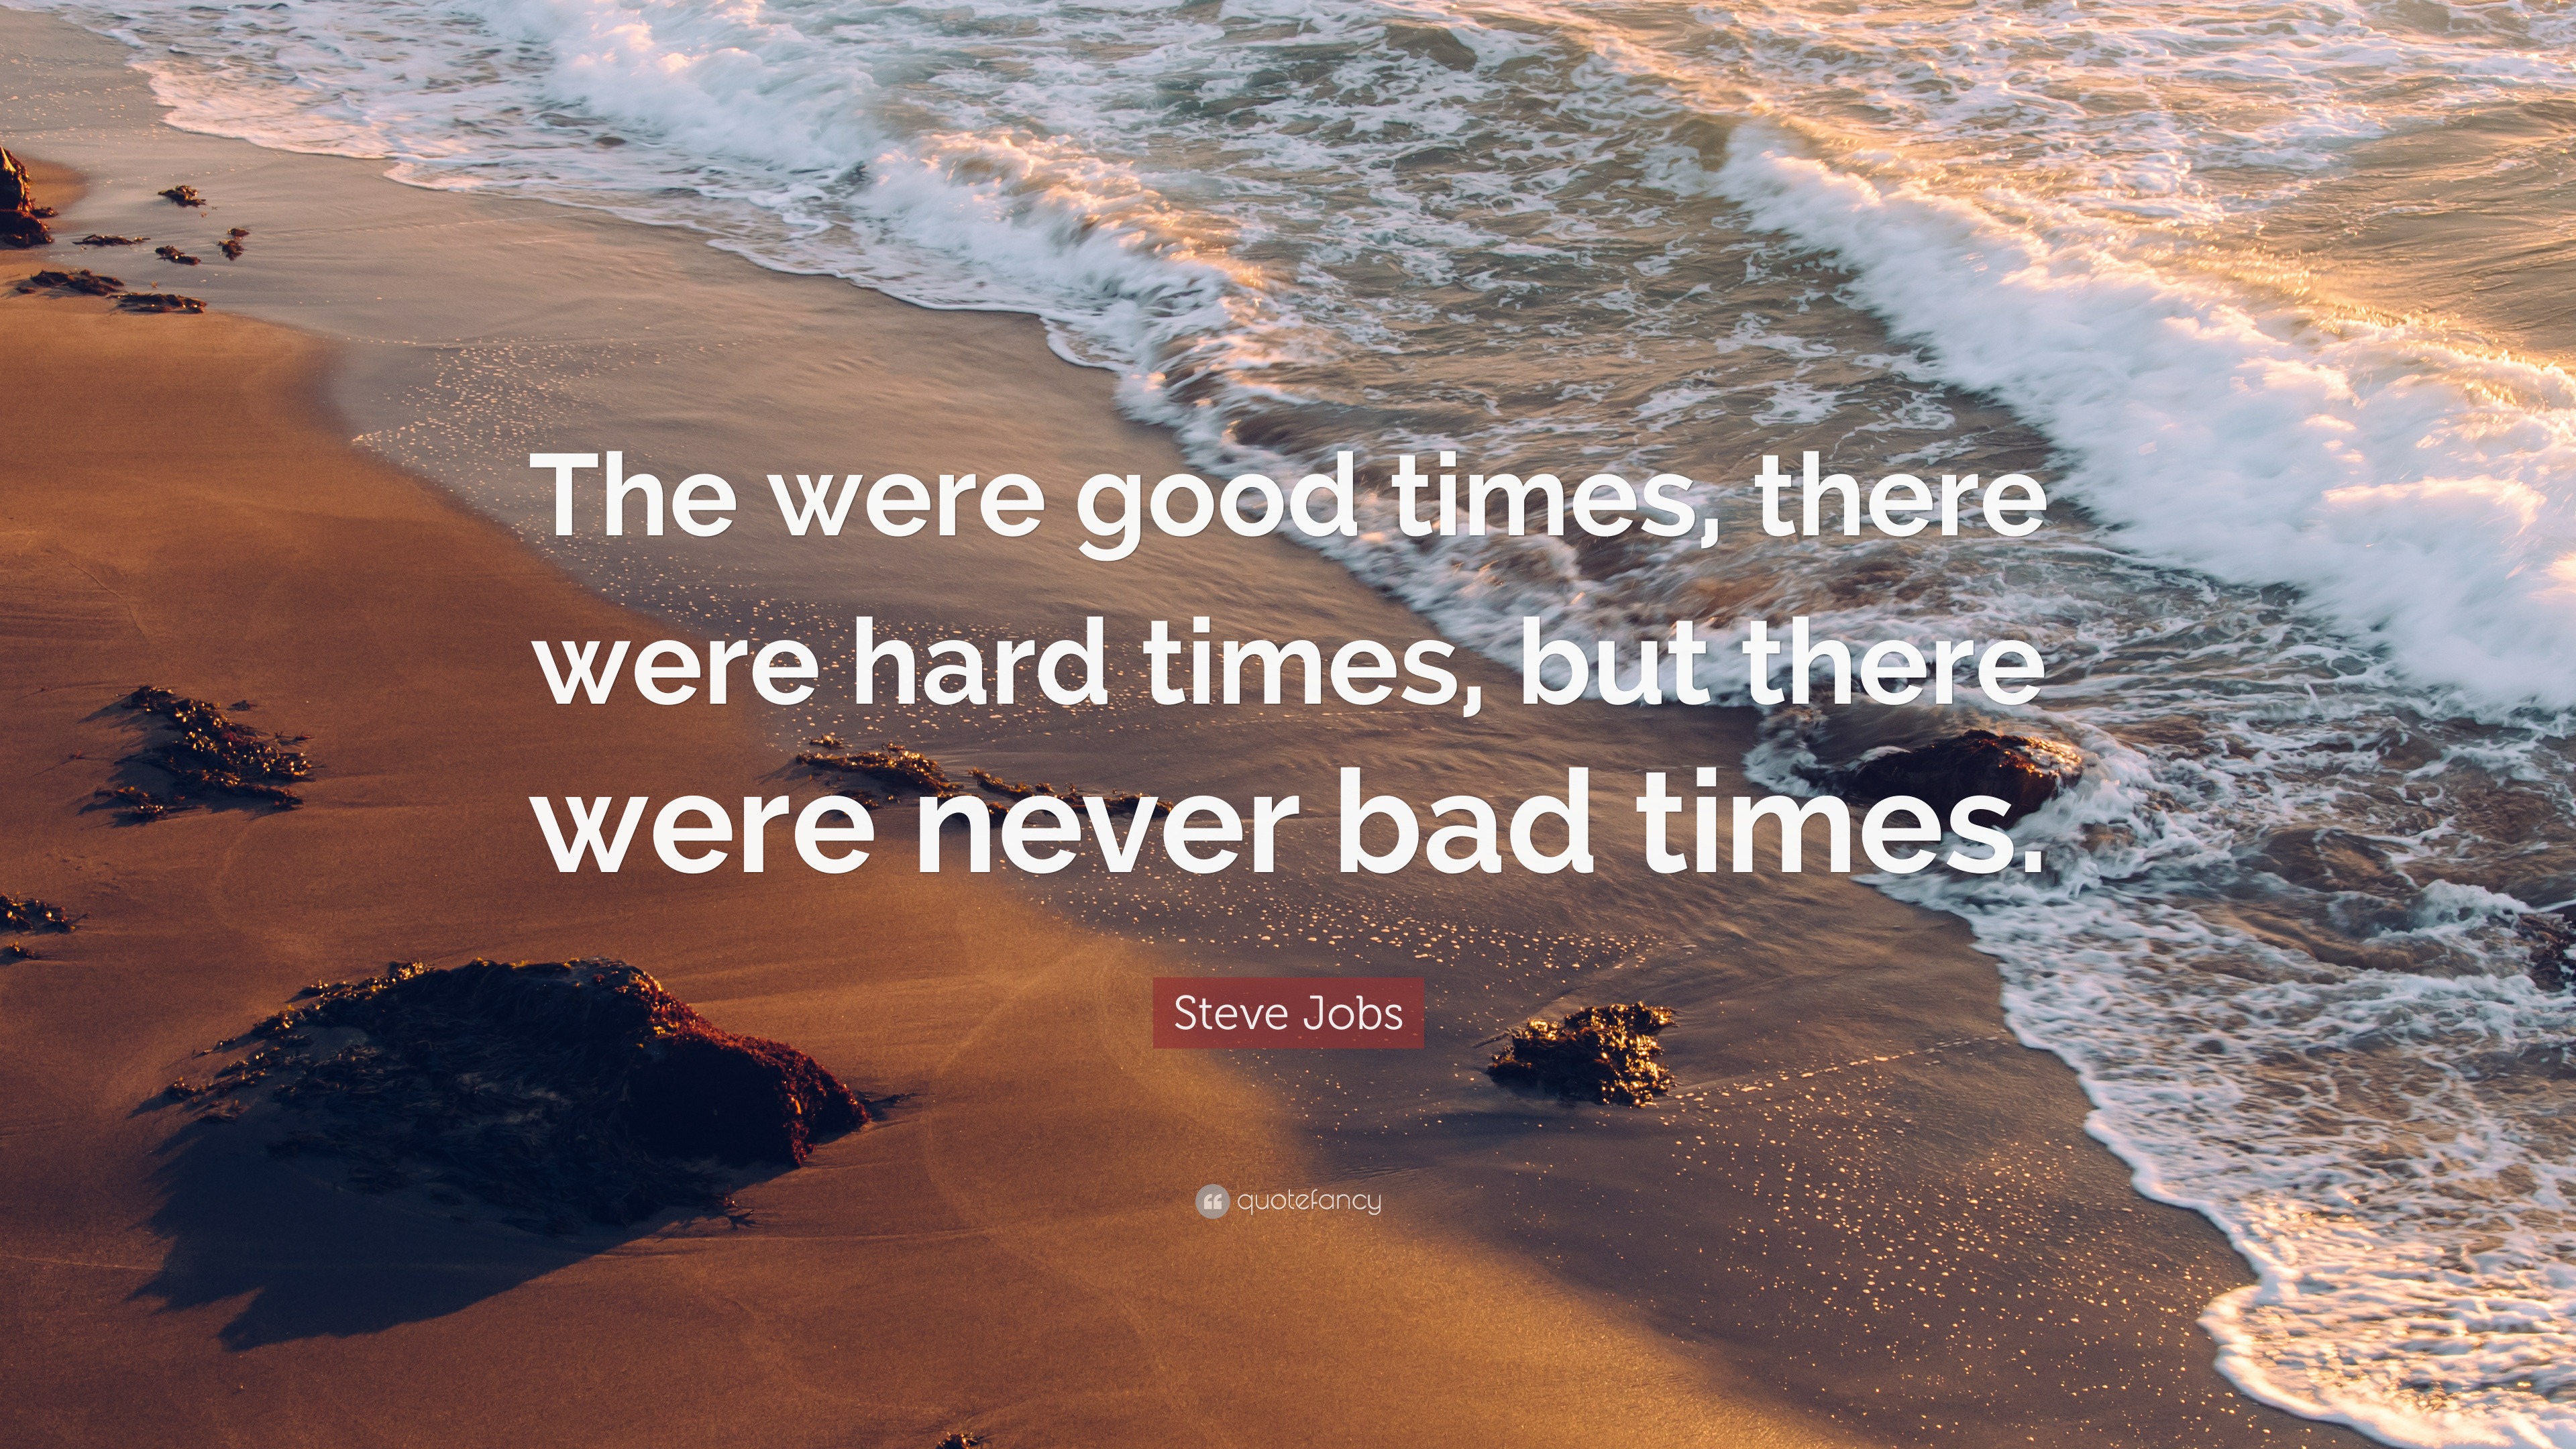 Hard Times wallpapers, Movie, HQ Hard Times pictures | 4K Wallpapers 2019